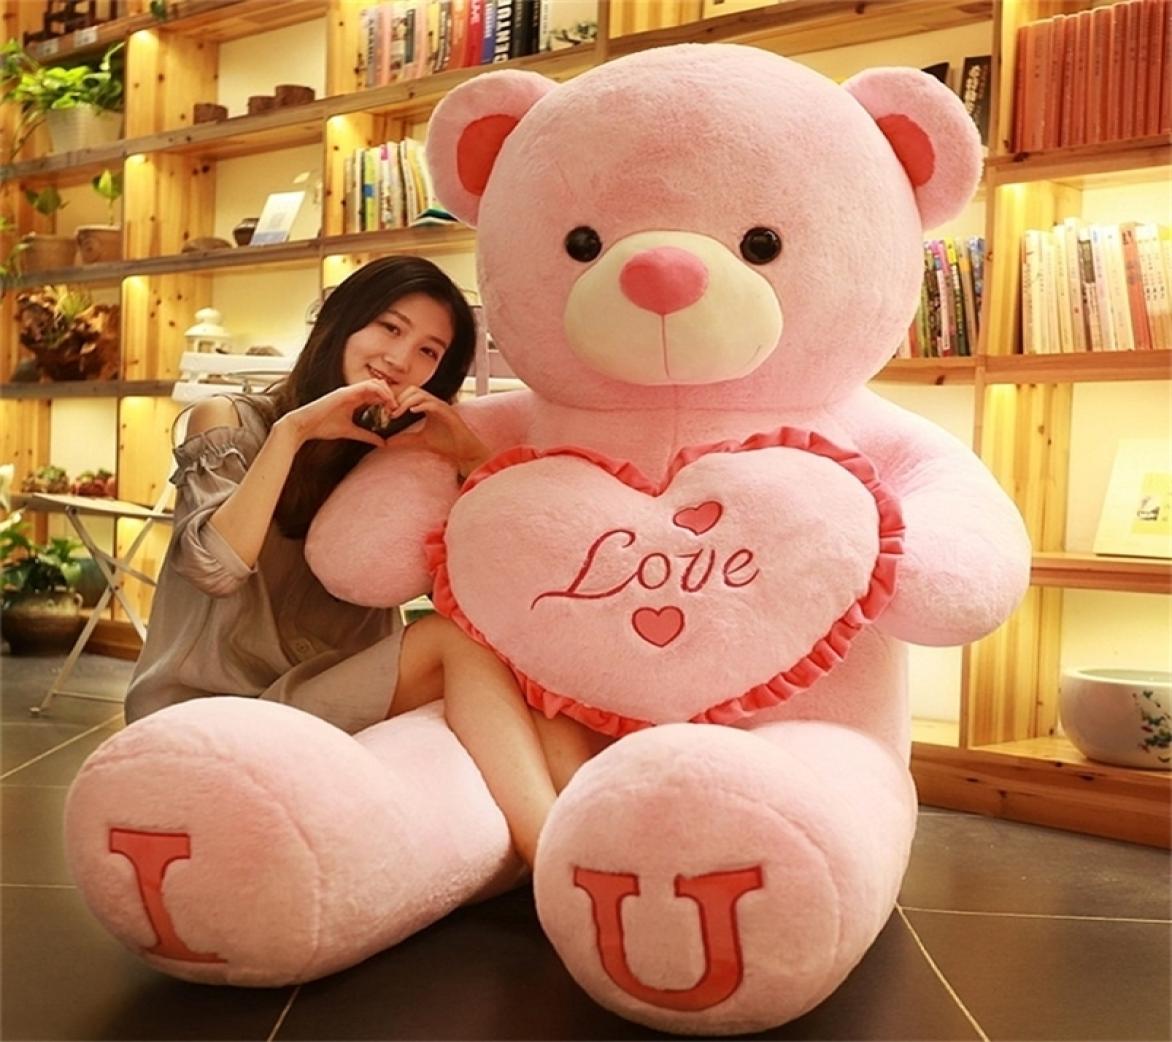 

80100Cm Plush Toy Creative Teddy Bear Giant Stuffed Animals Valentine Day Gift for Kids Pillow Grilfriend Girl Wife 2202179906002, Brown 50cm